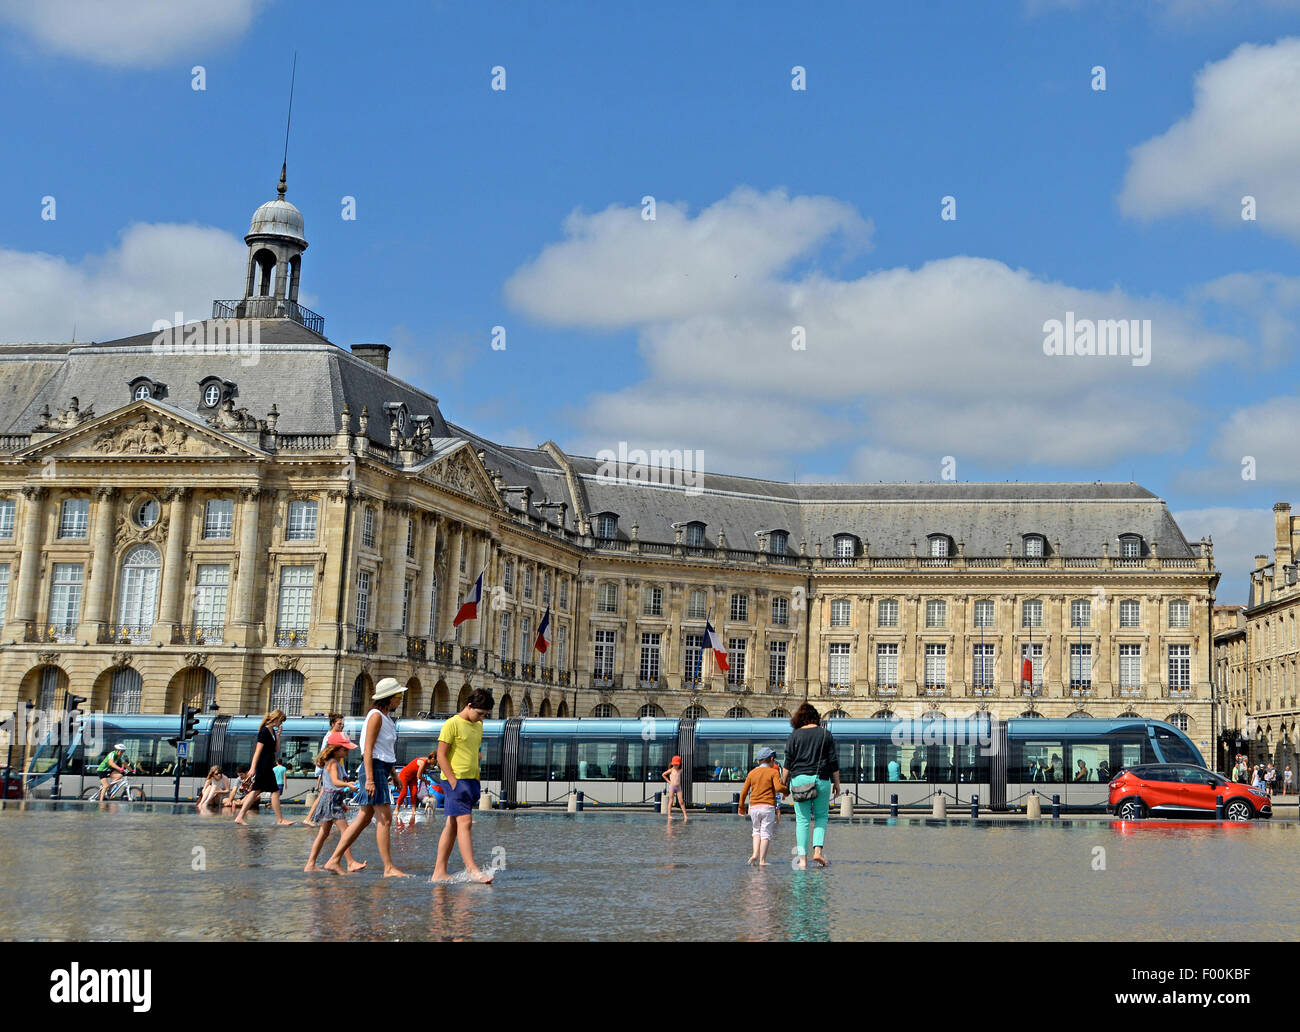 Tram before the water mirror Bourse square Bordeaux Gironde Aquitaine France Stock Photo